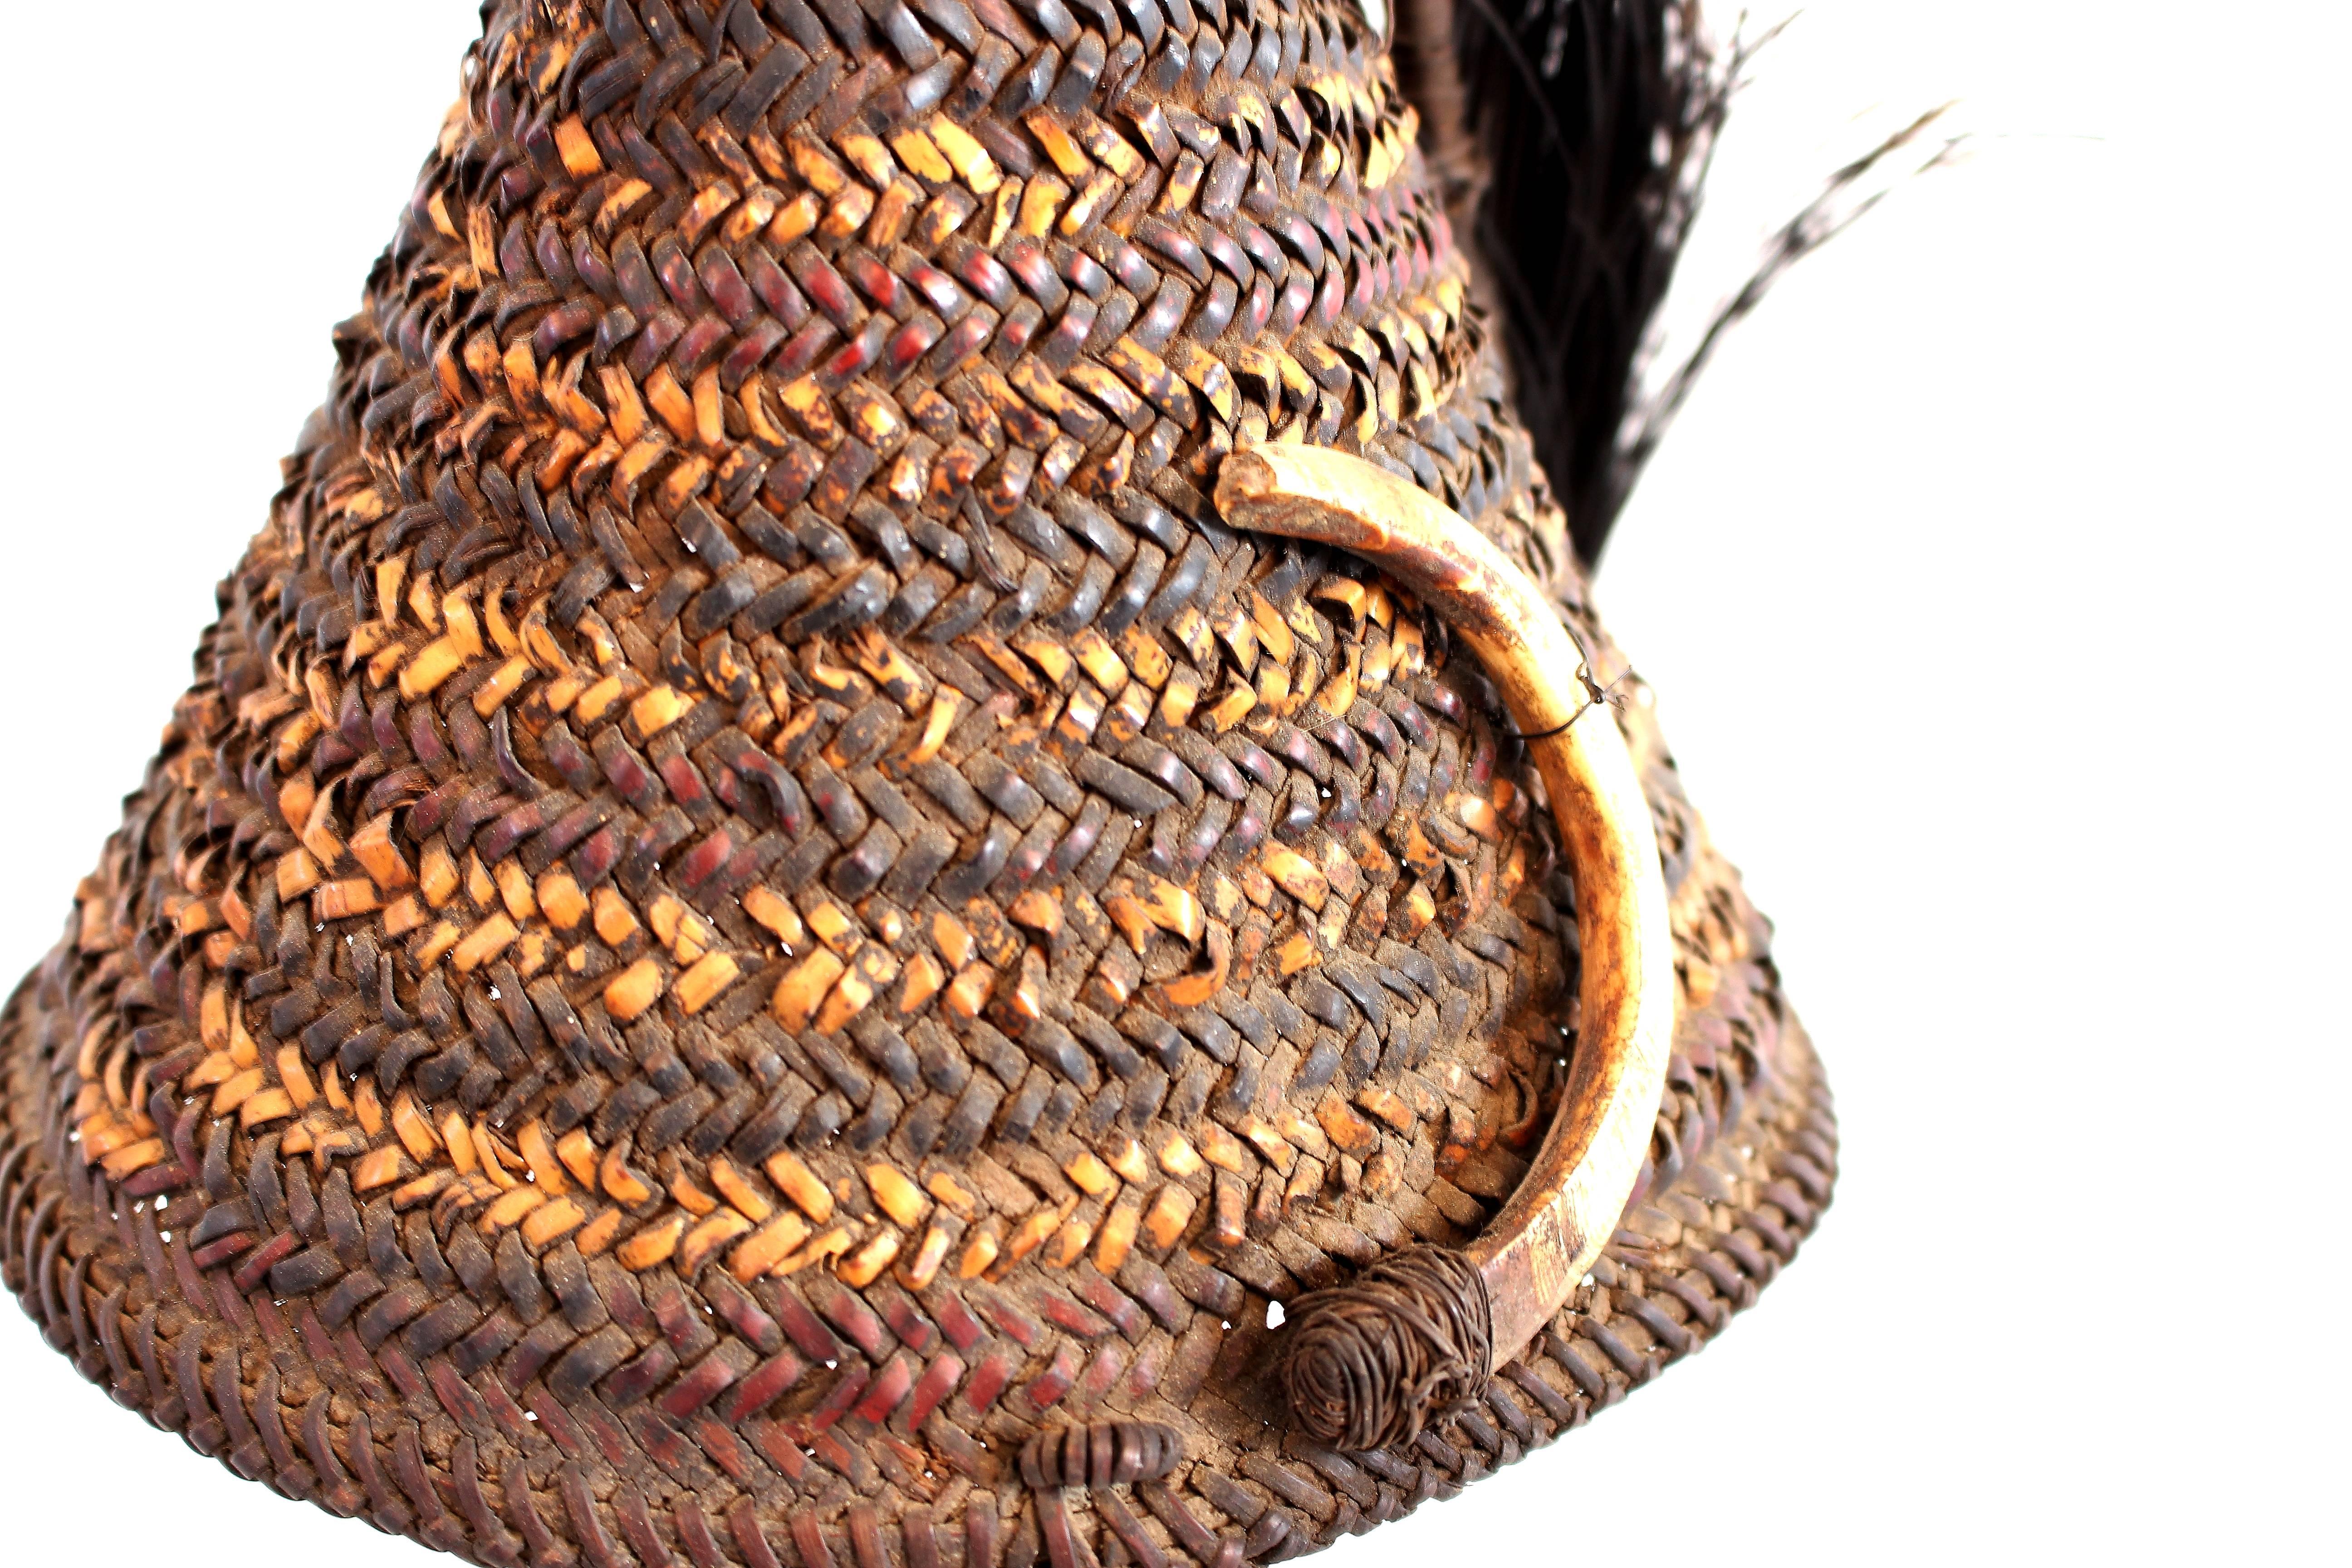 Naga Warrior’s Hat with Boar’s Tusk and Fur Plume 1